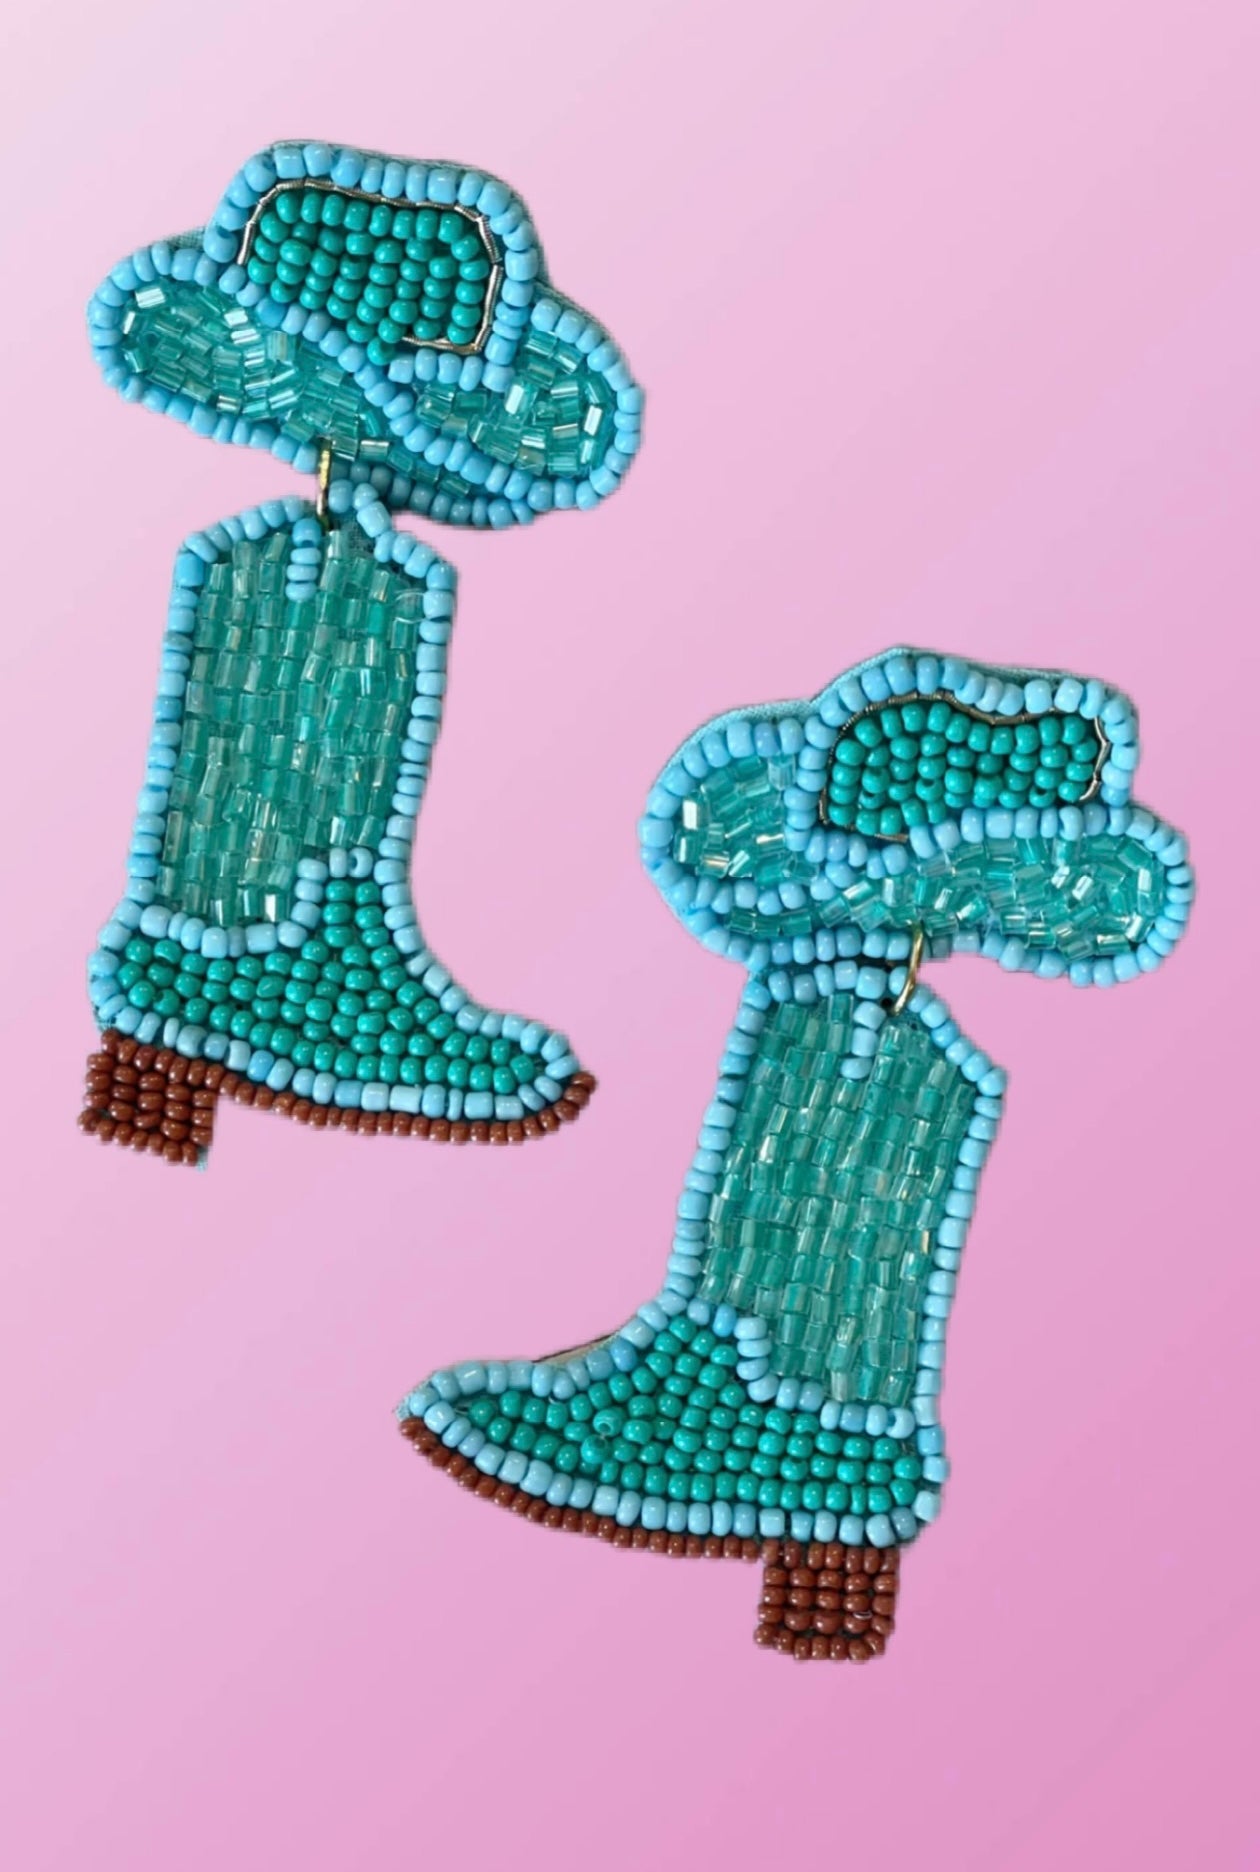 cowgirl boot seed bead earrings, turquoise